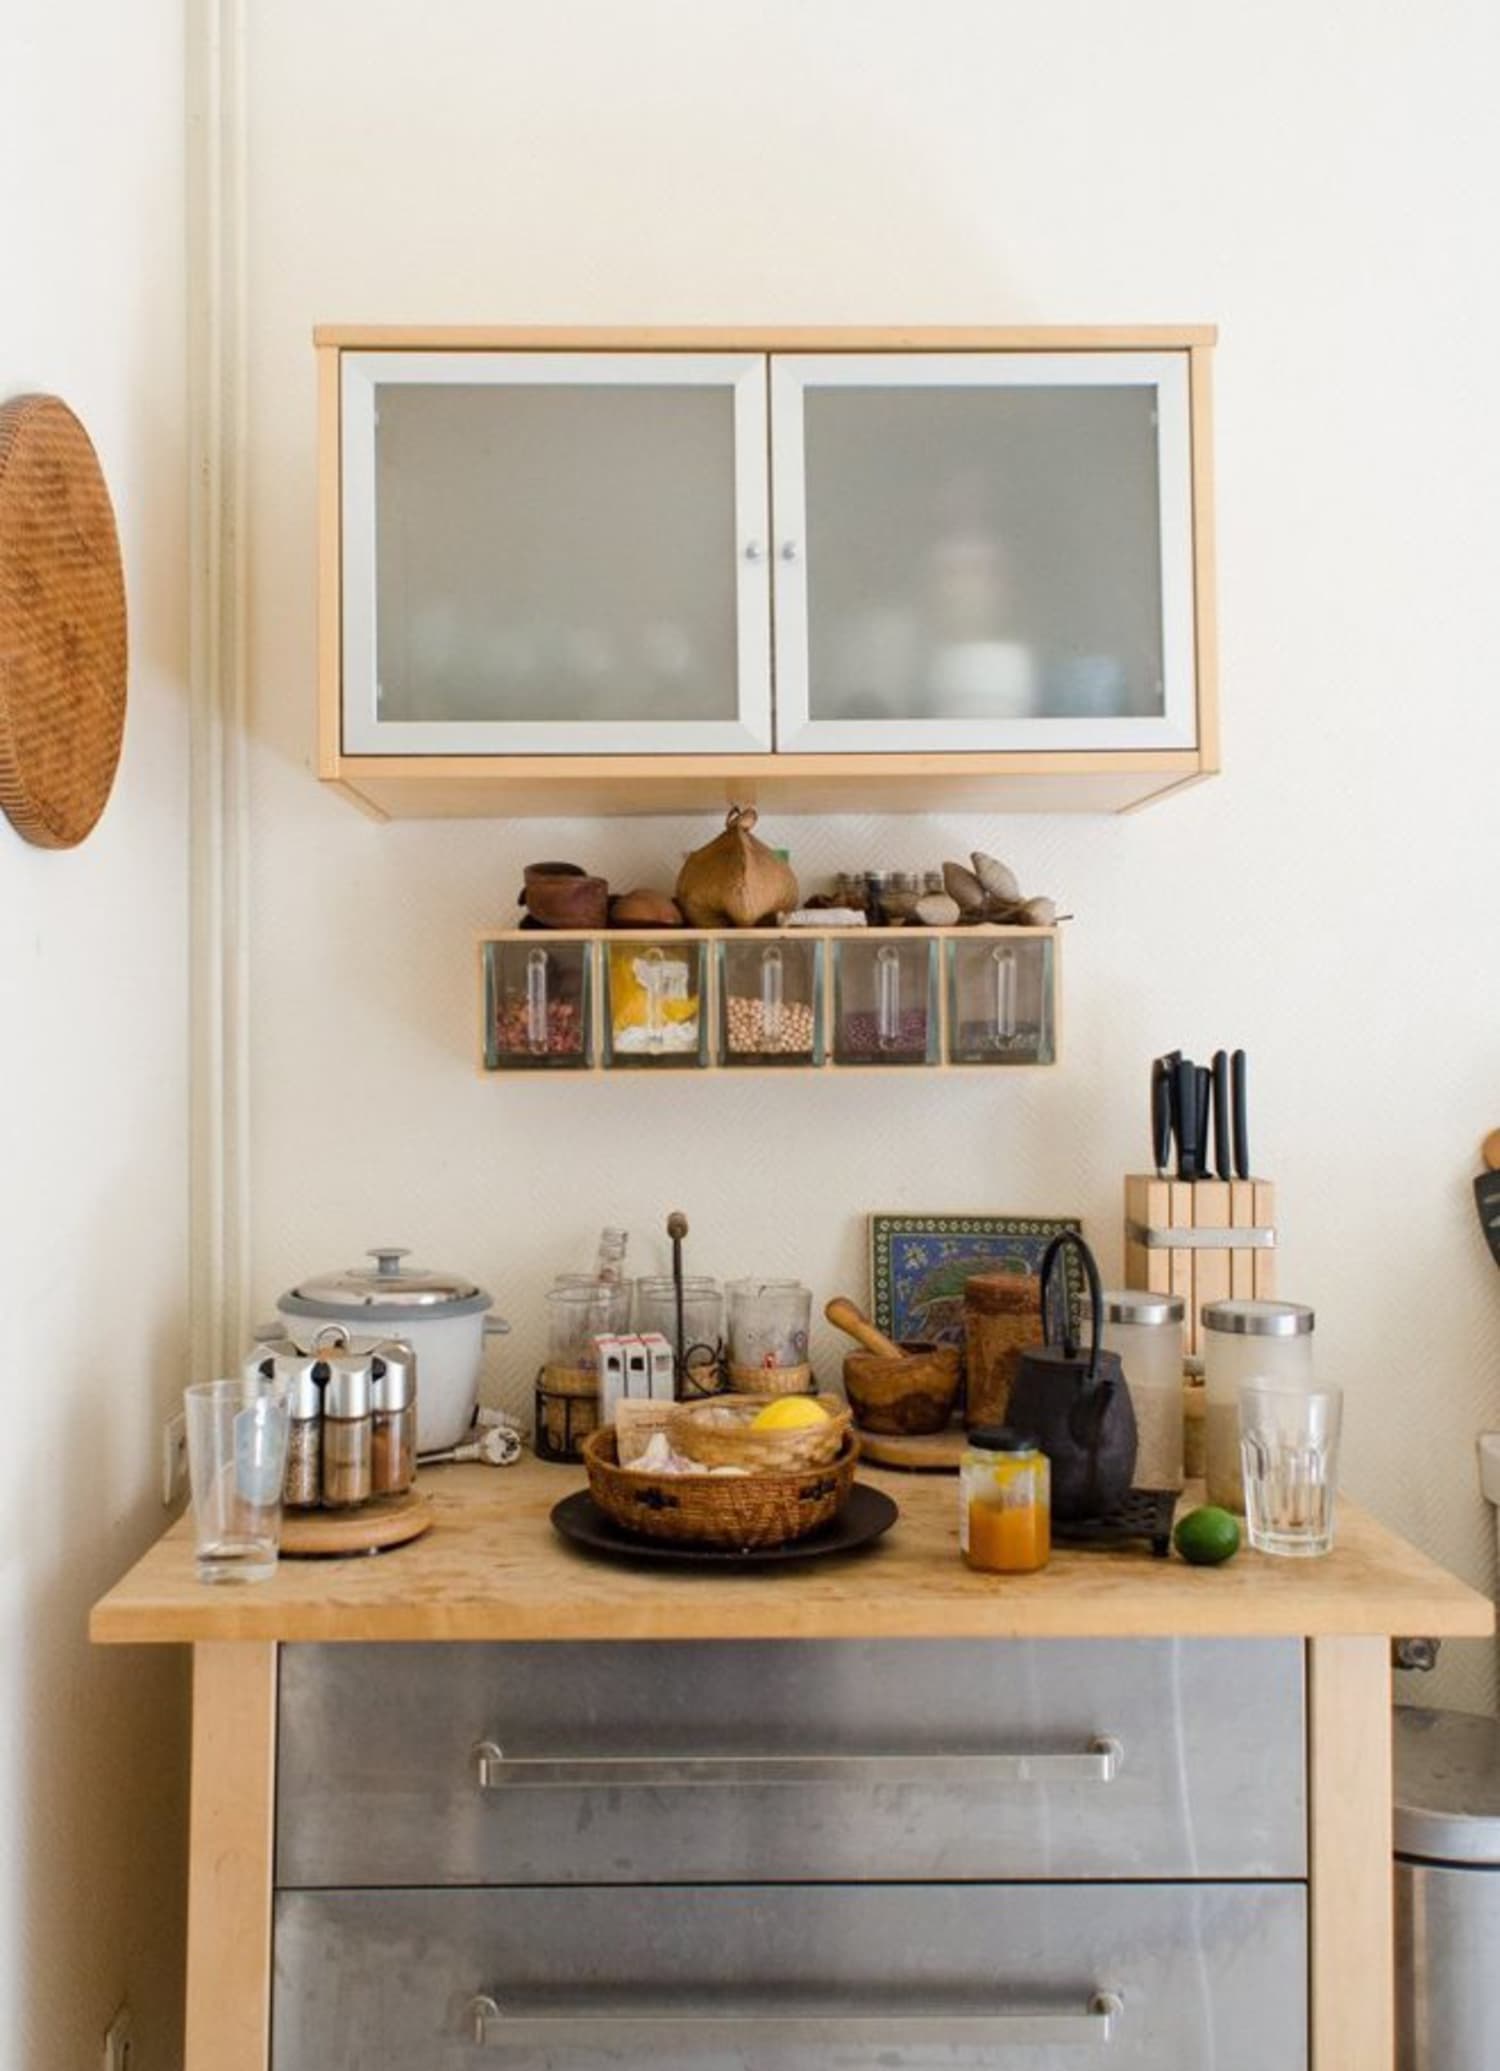  Setting  Up  Home  5 Ways to Make a Lovely Kitchen  